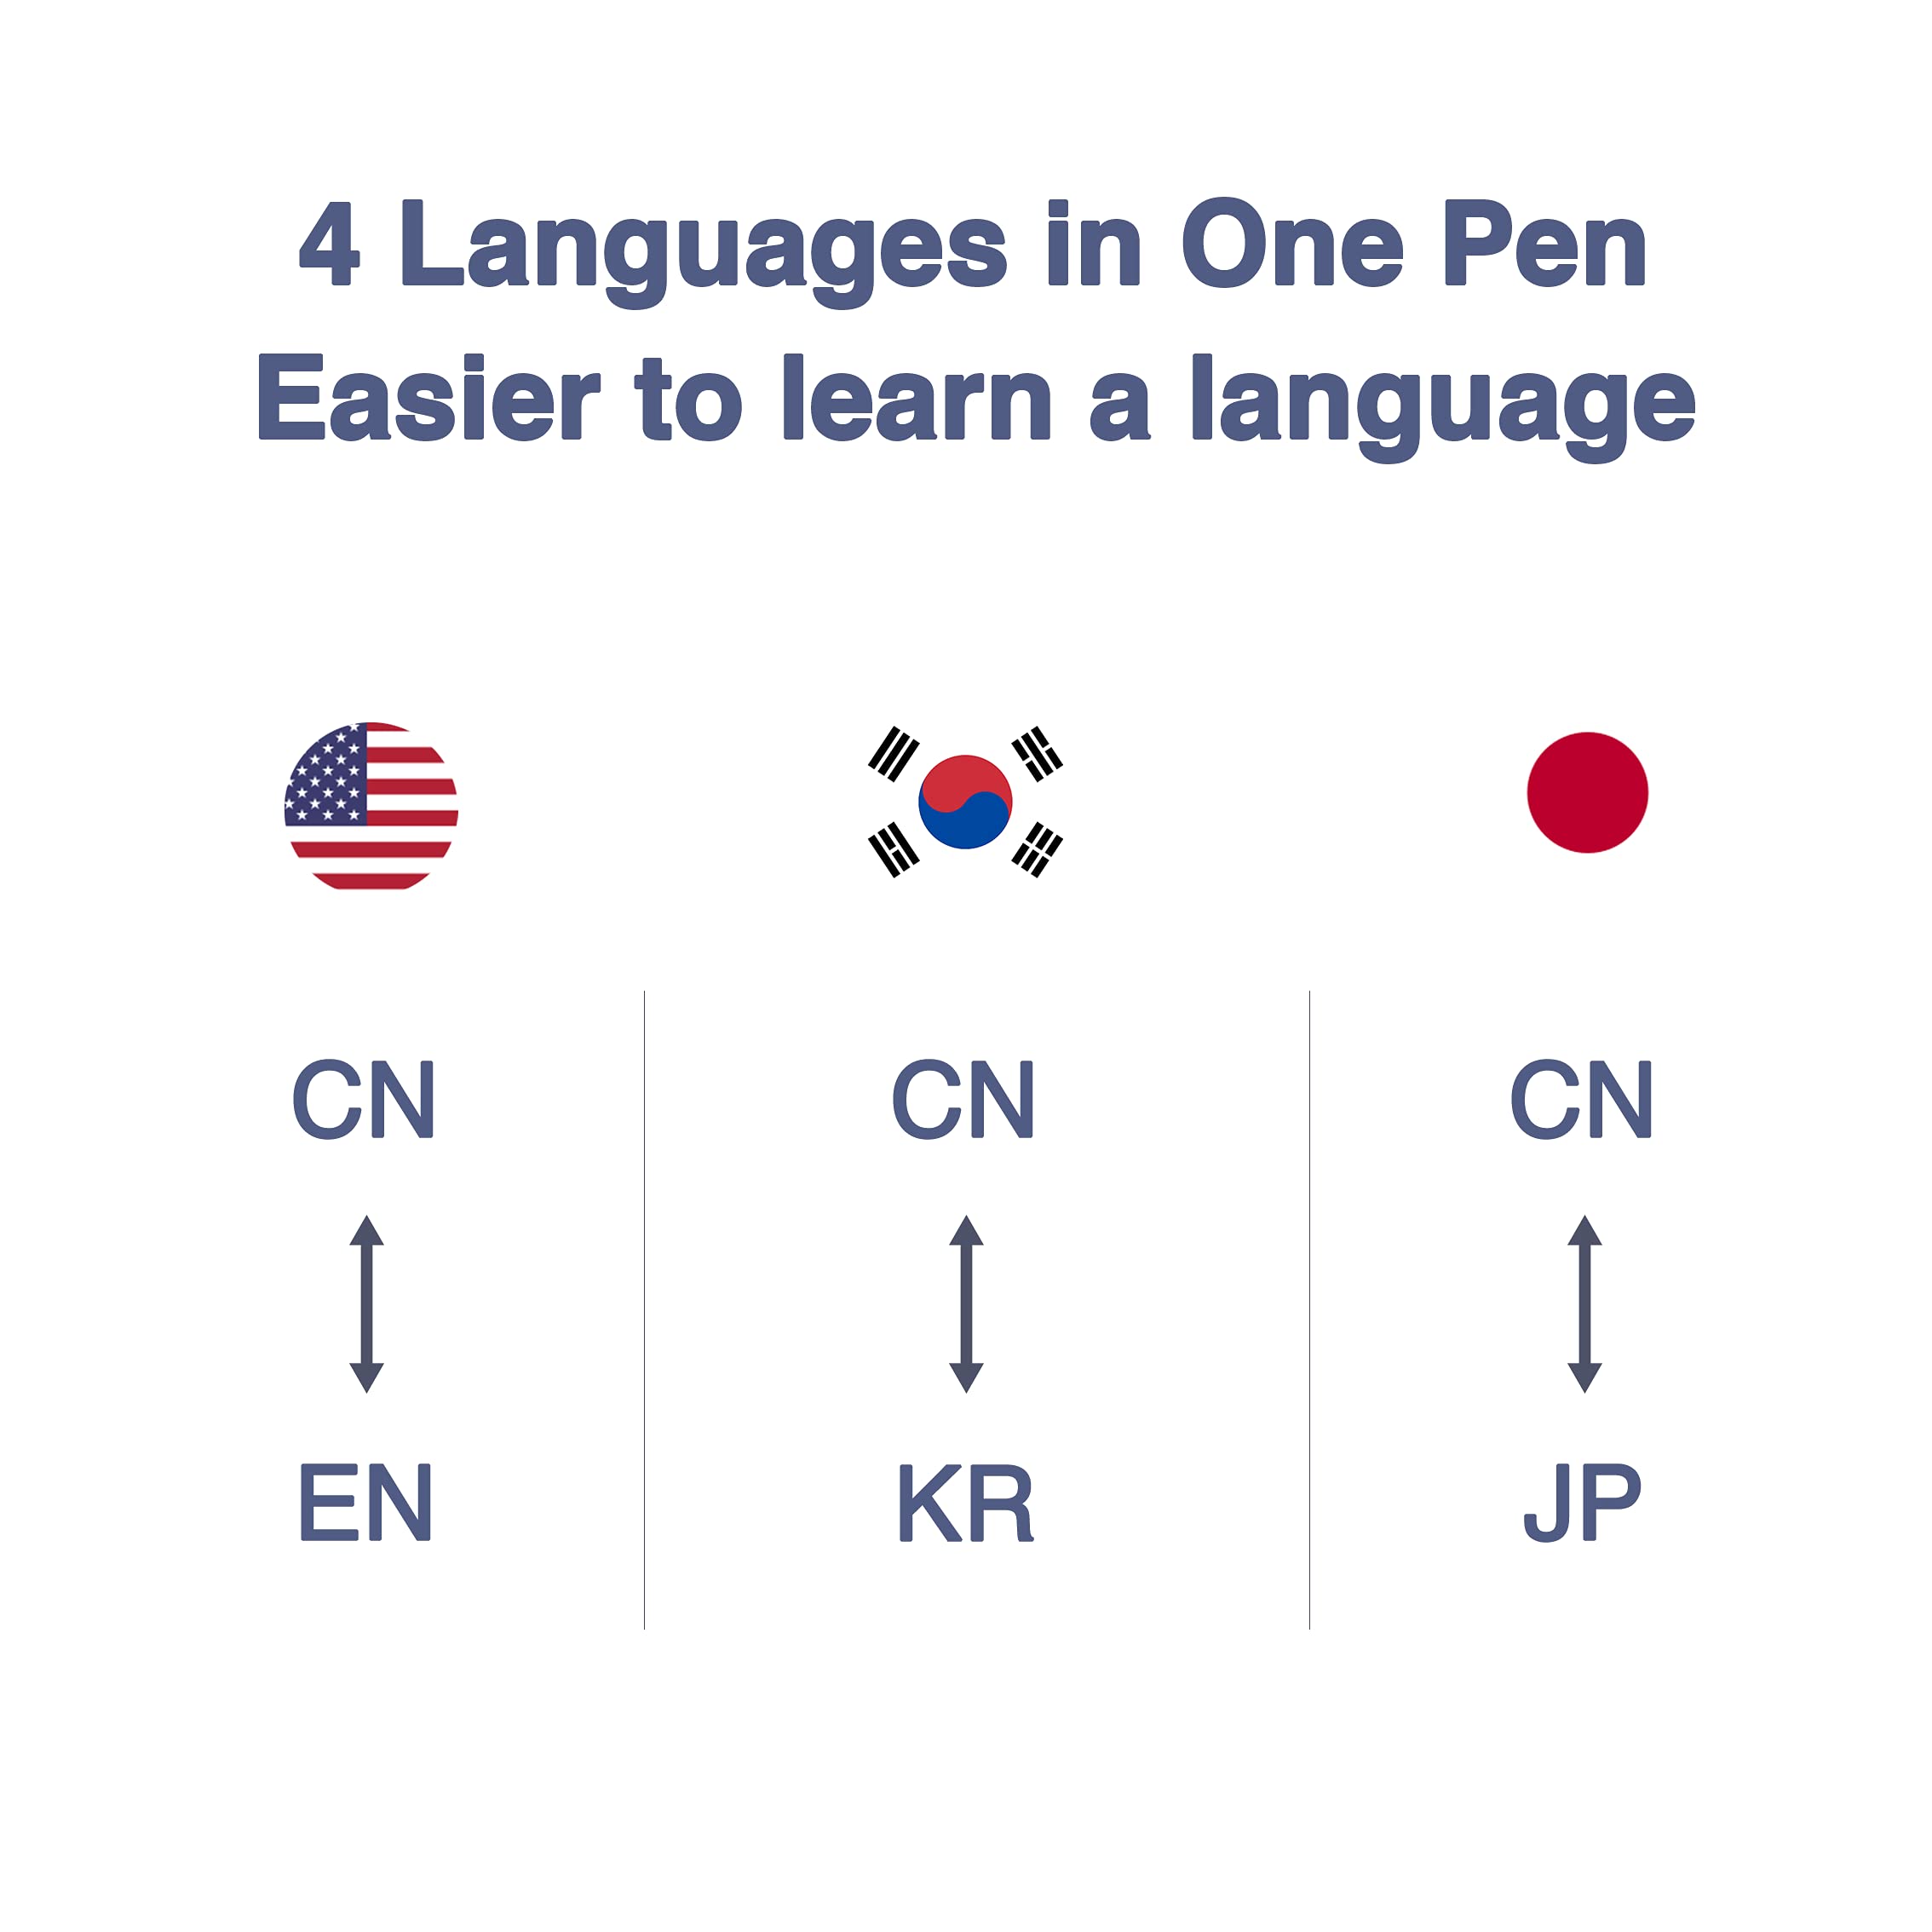 Youdao Dictionary Pen P3 Multi-Language Translator Device Covers More Languages APP Control with Chinese Interface